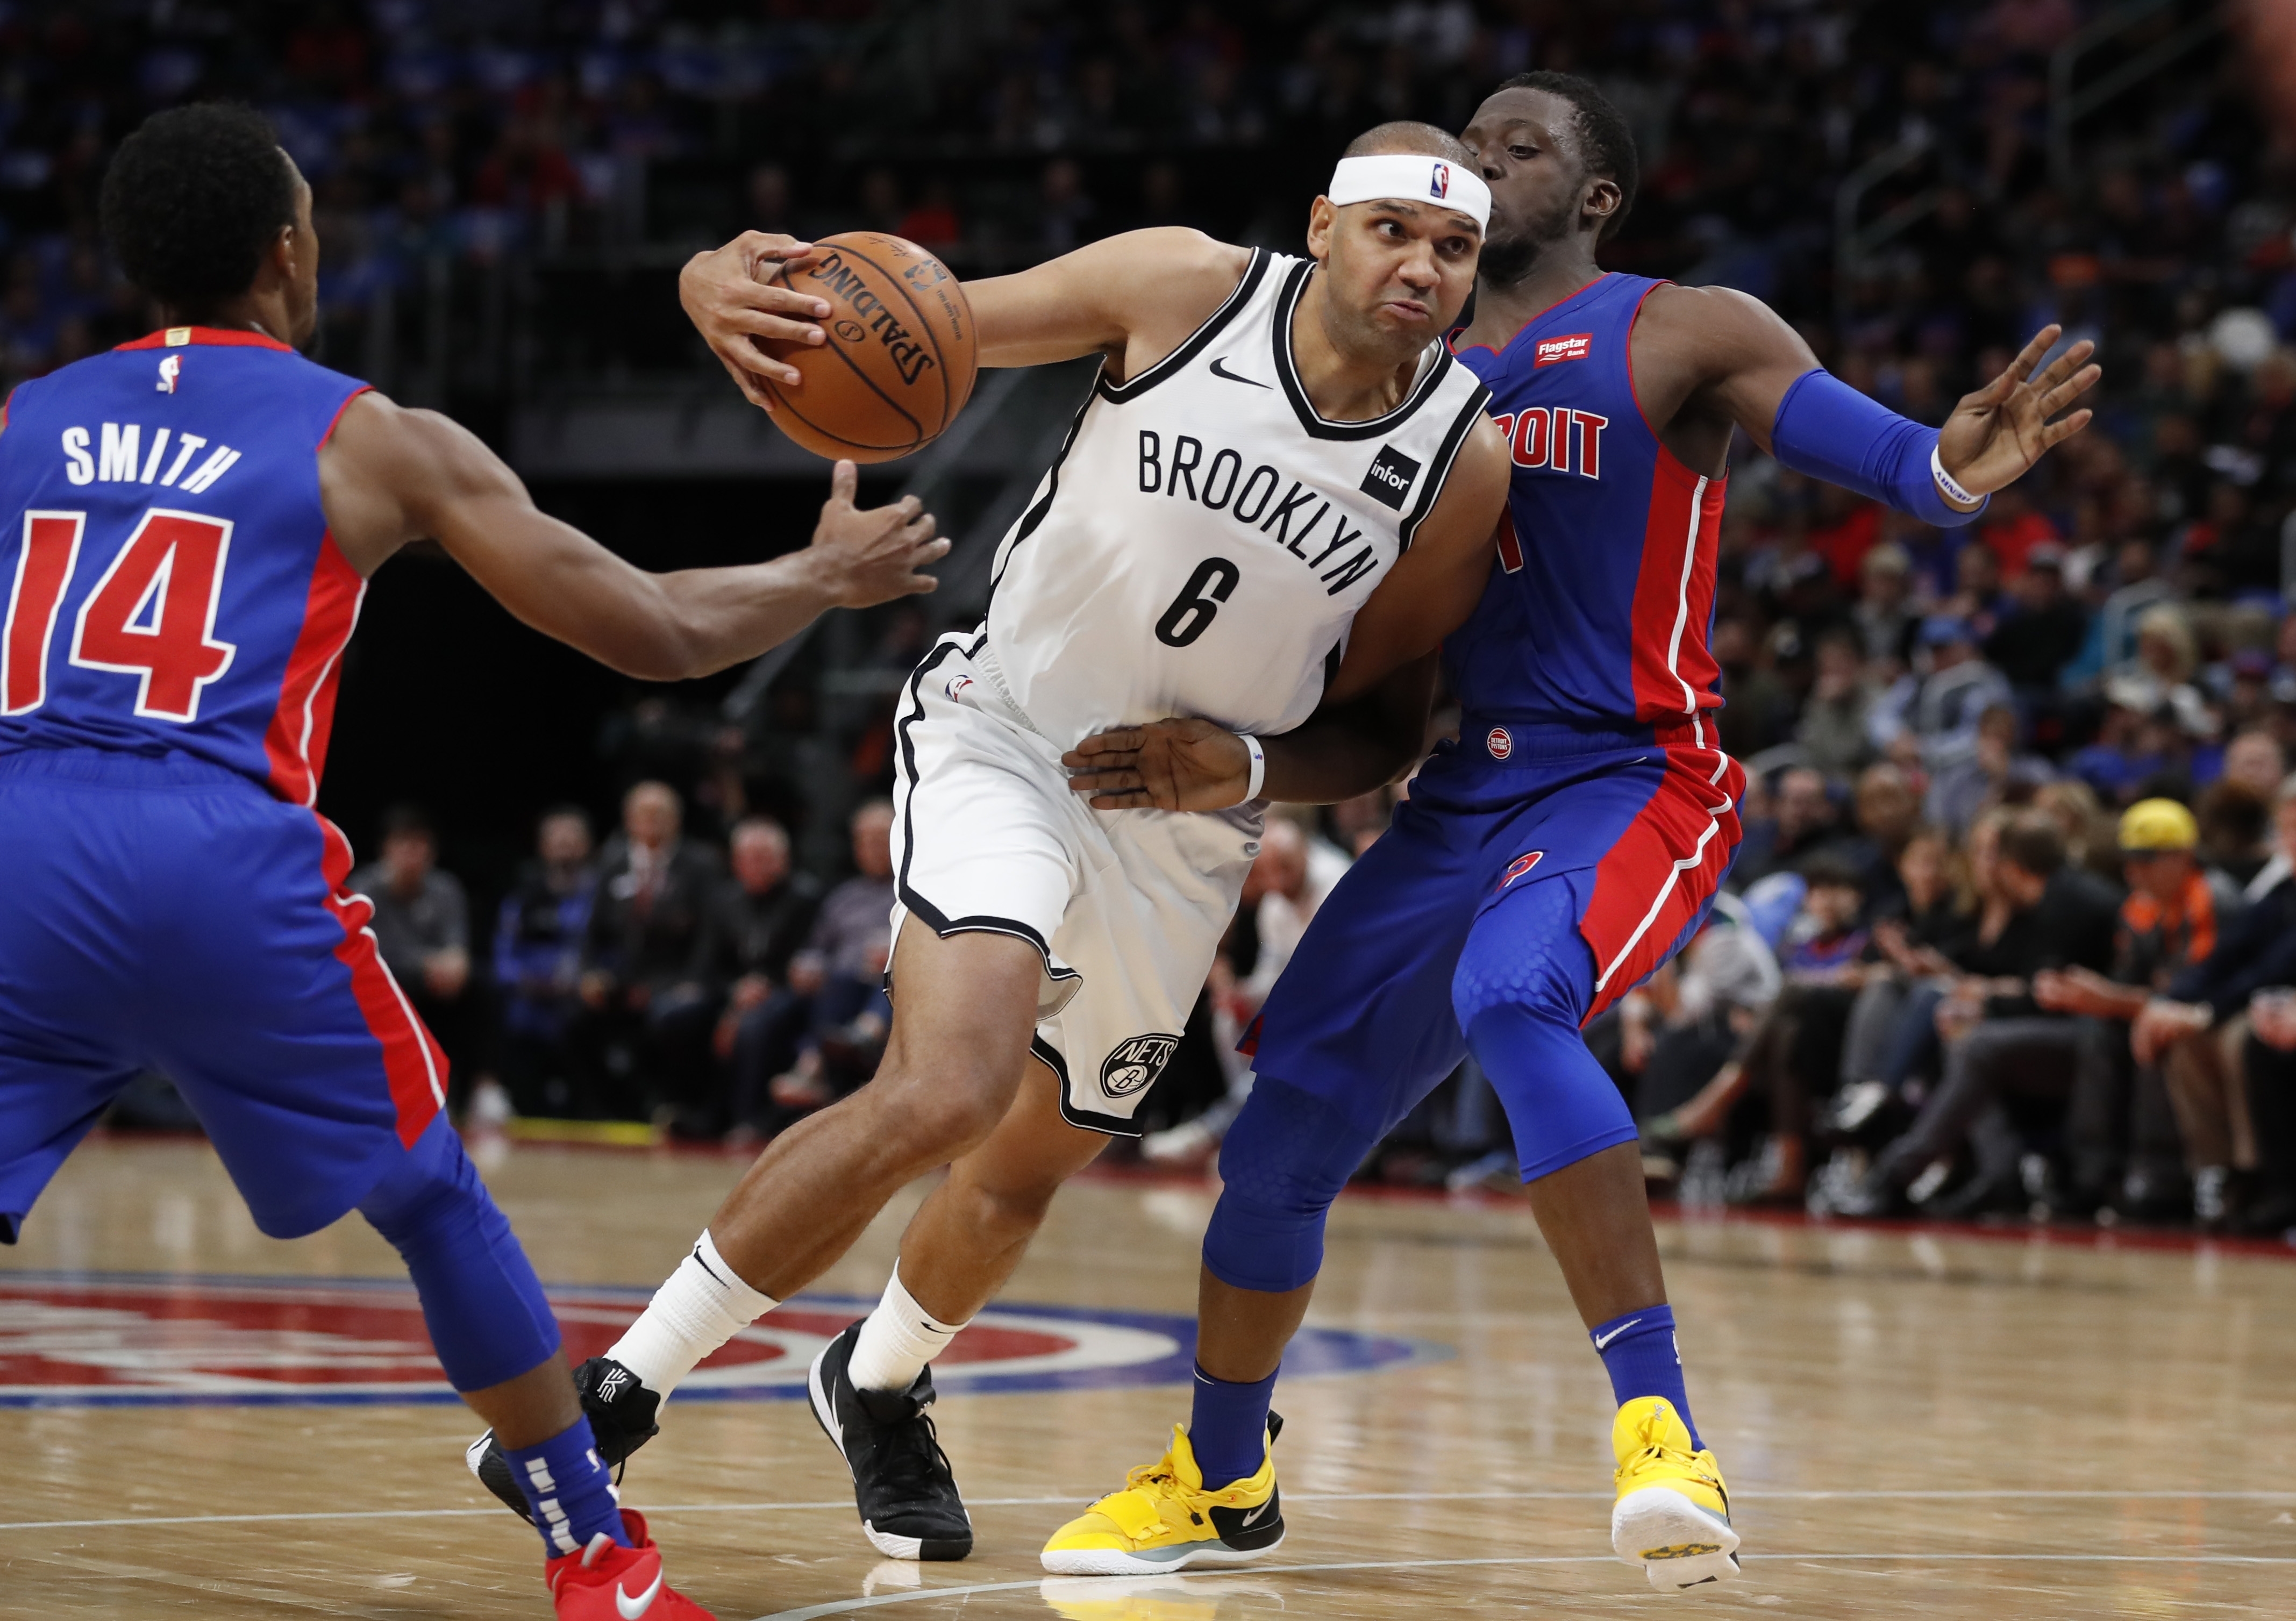 Casey wins debut with Pistons, 103-100 over Nets